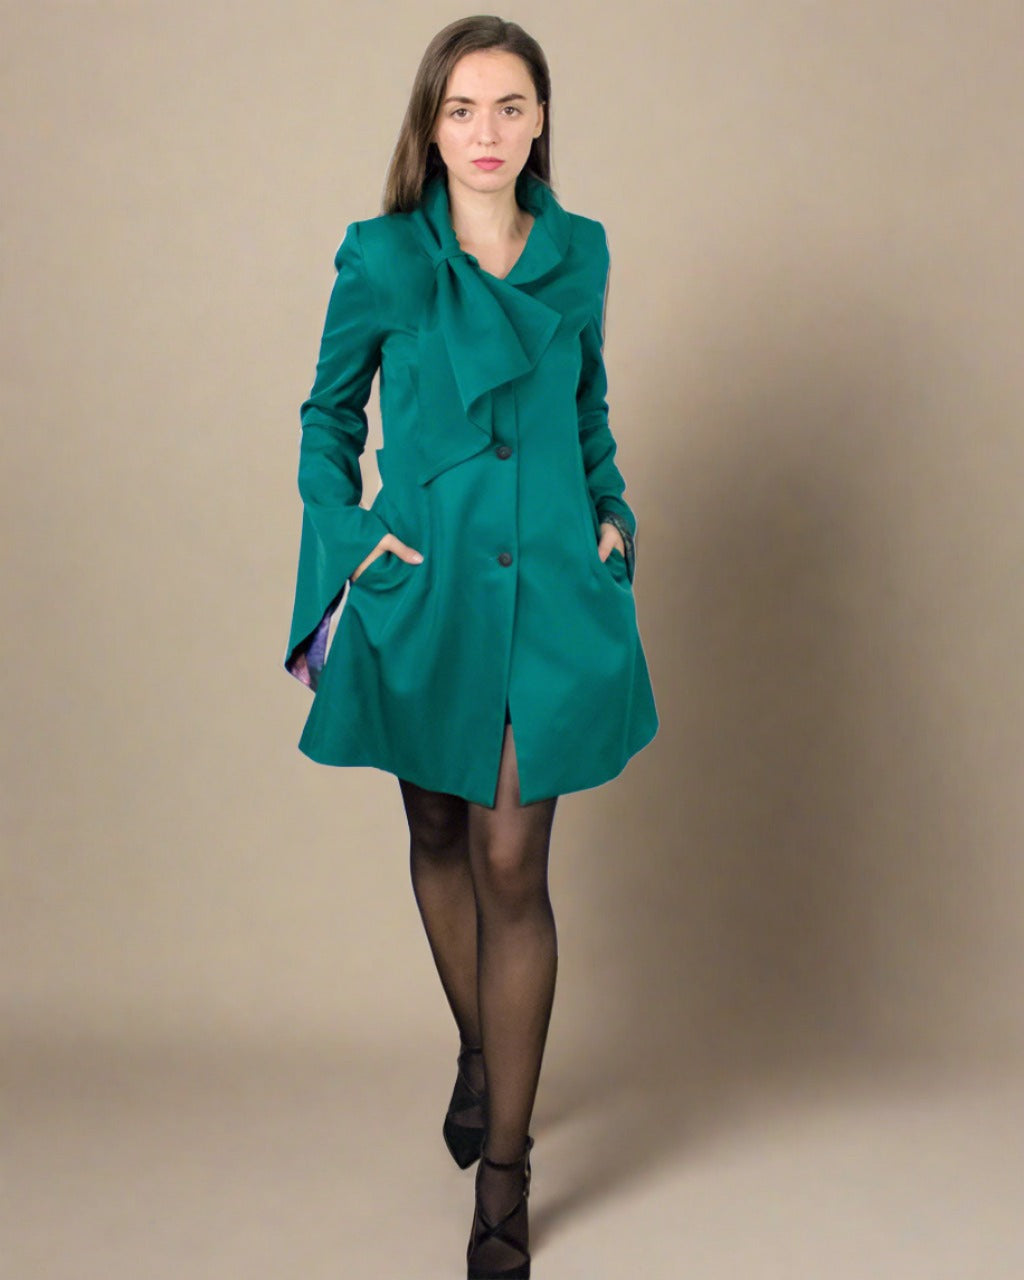 Designer ethical dark green ladies luxury trench coat with big bell sleeves ADKN made in UK from sustainable recycled bottles